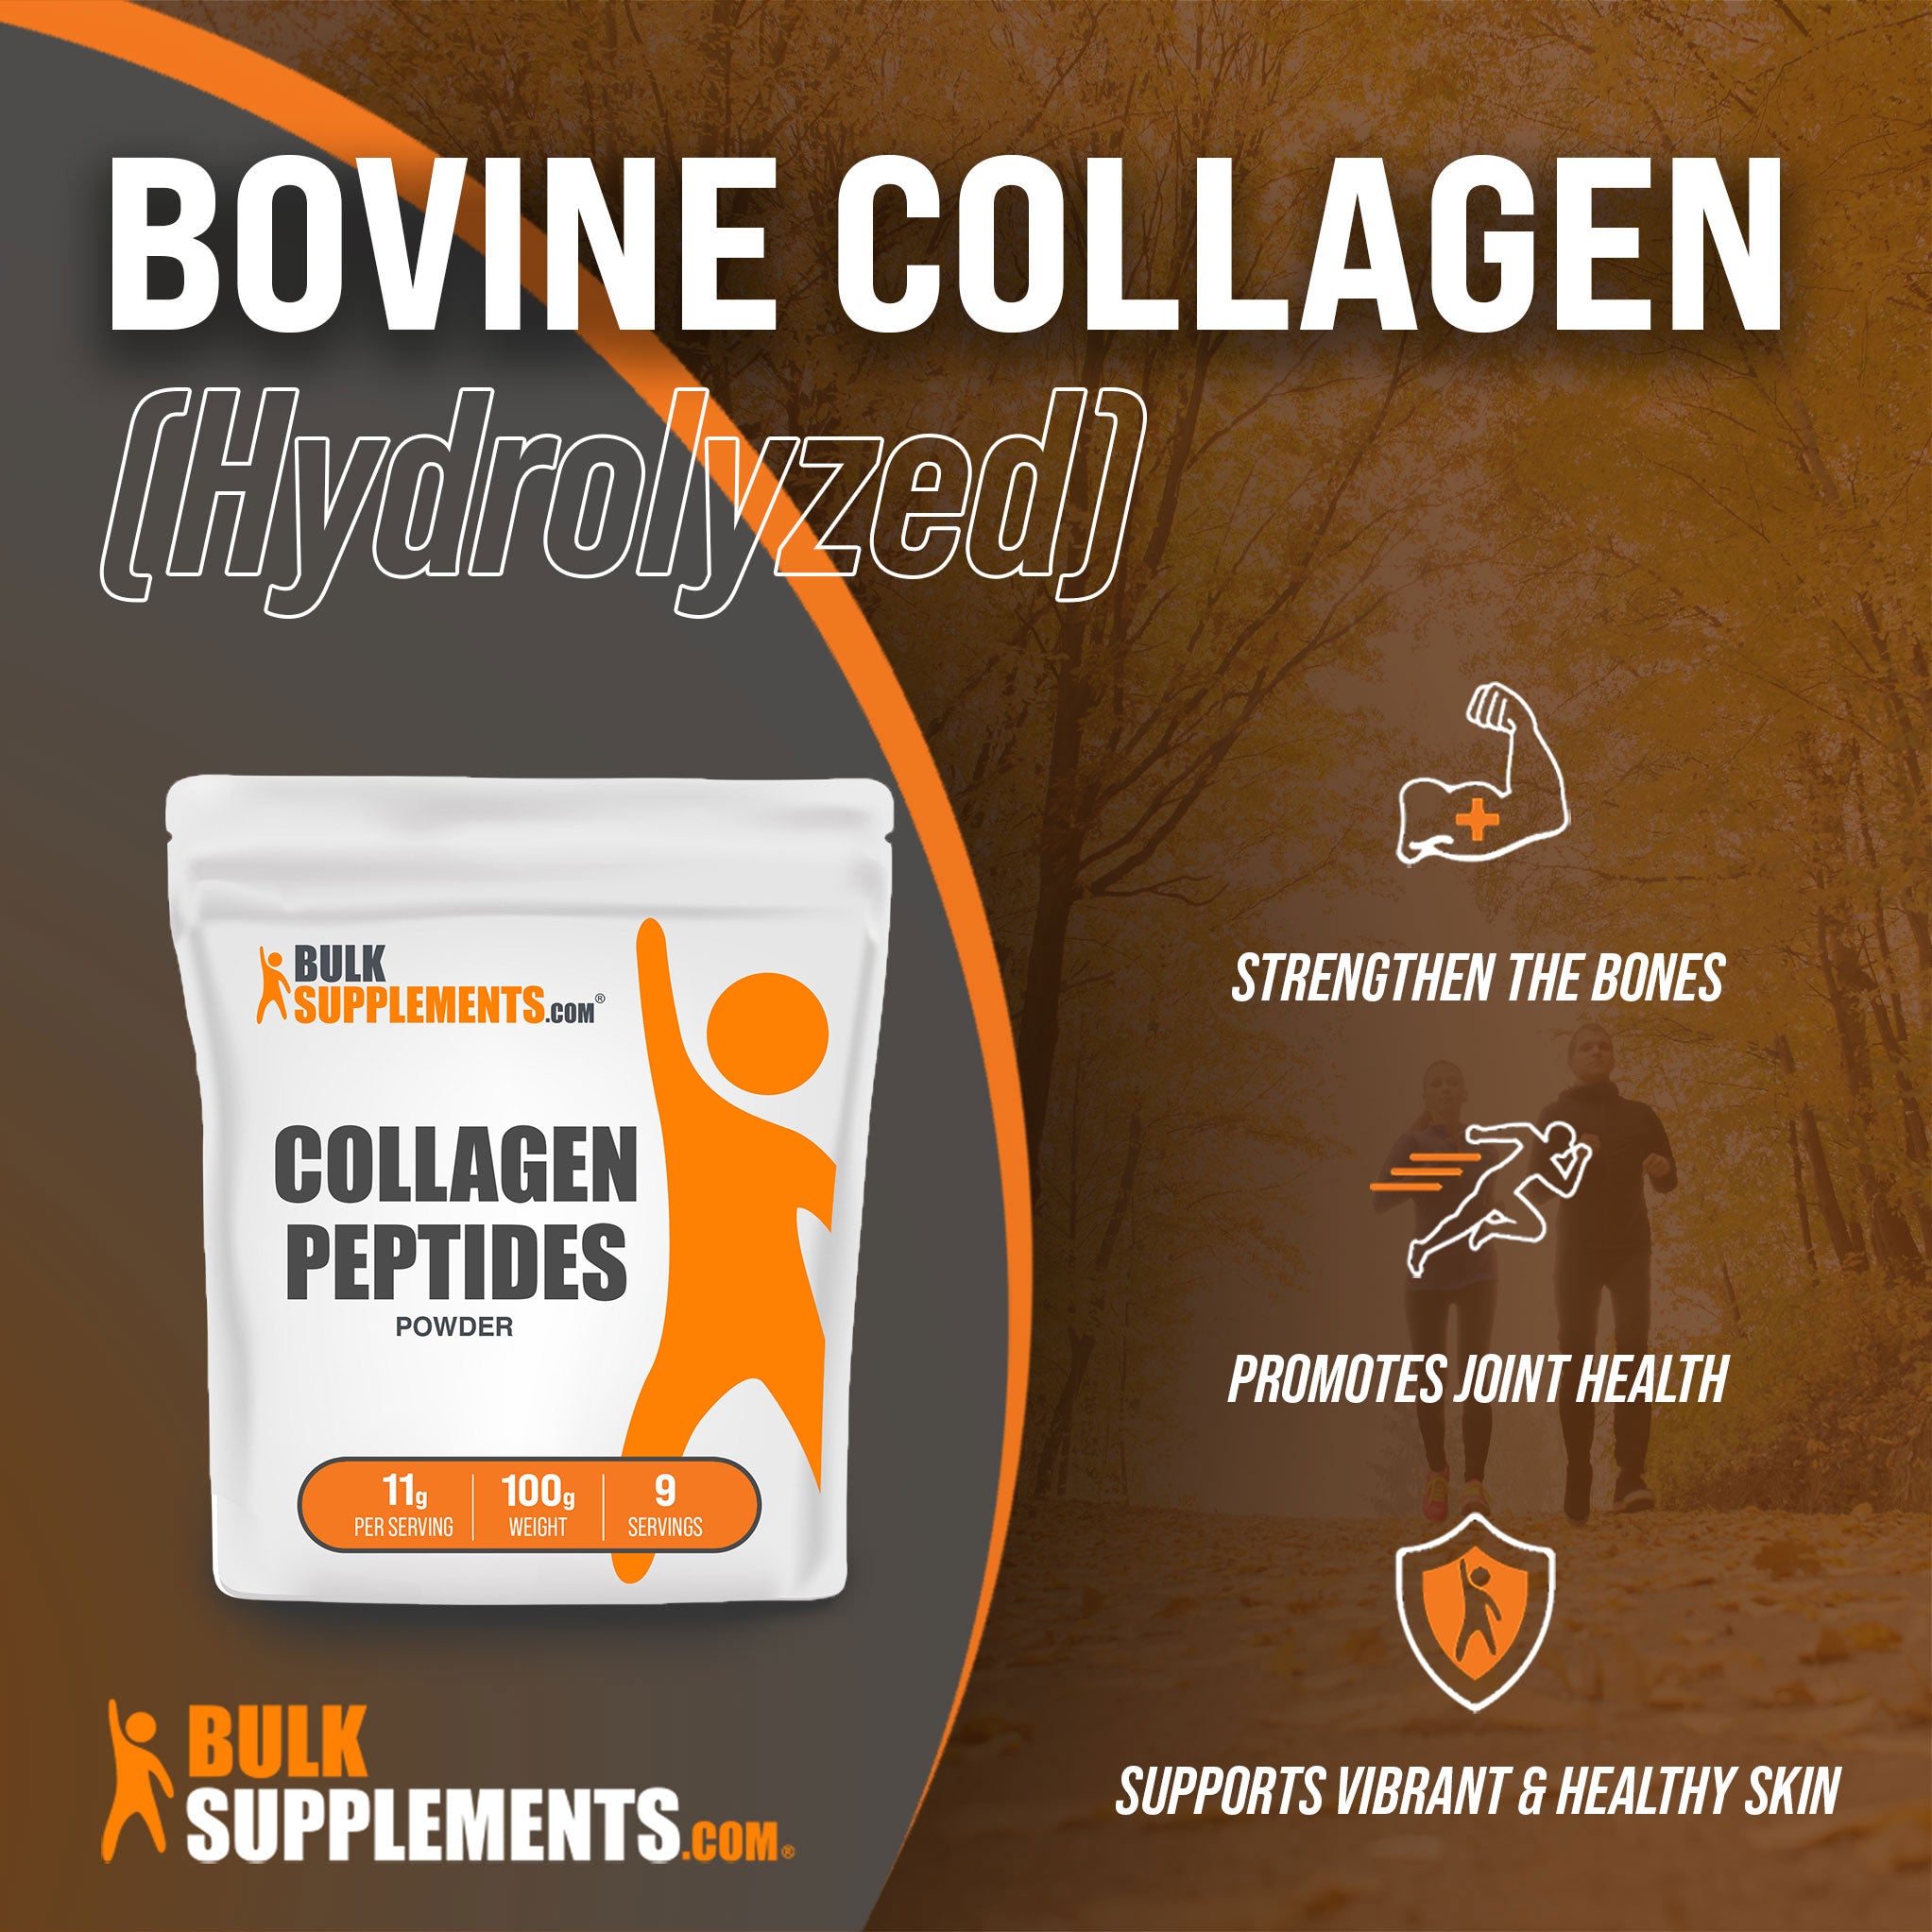 Benefits of Bovine Collagen (Hydrolyzed); strengthen the bones, promotes joint health, supports vibrant and healthy skin